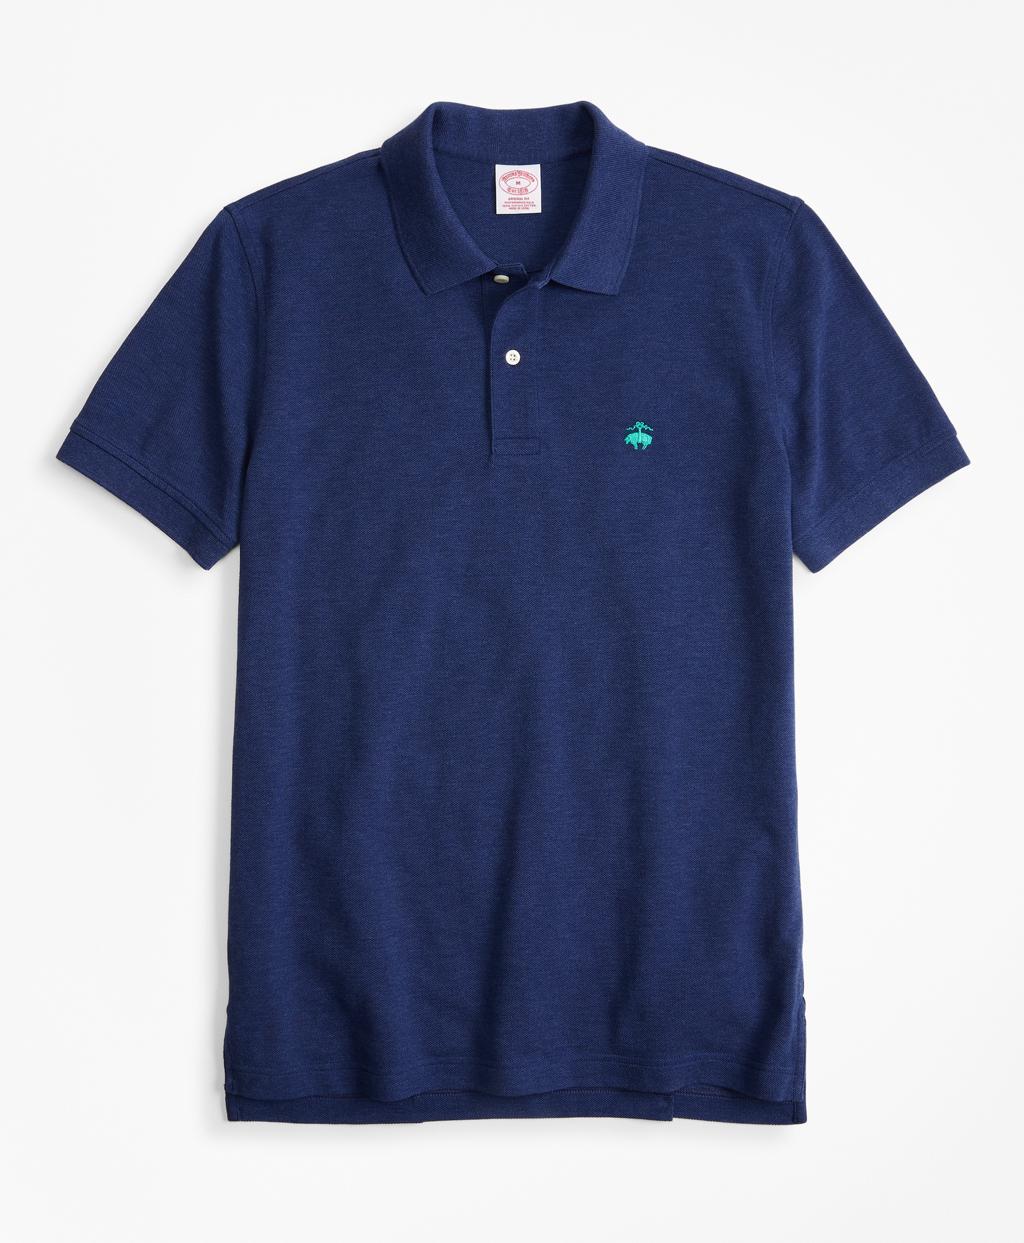 Brooks Brothers Original Fit Supima Cotton Performance Polo Shirt in ...